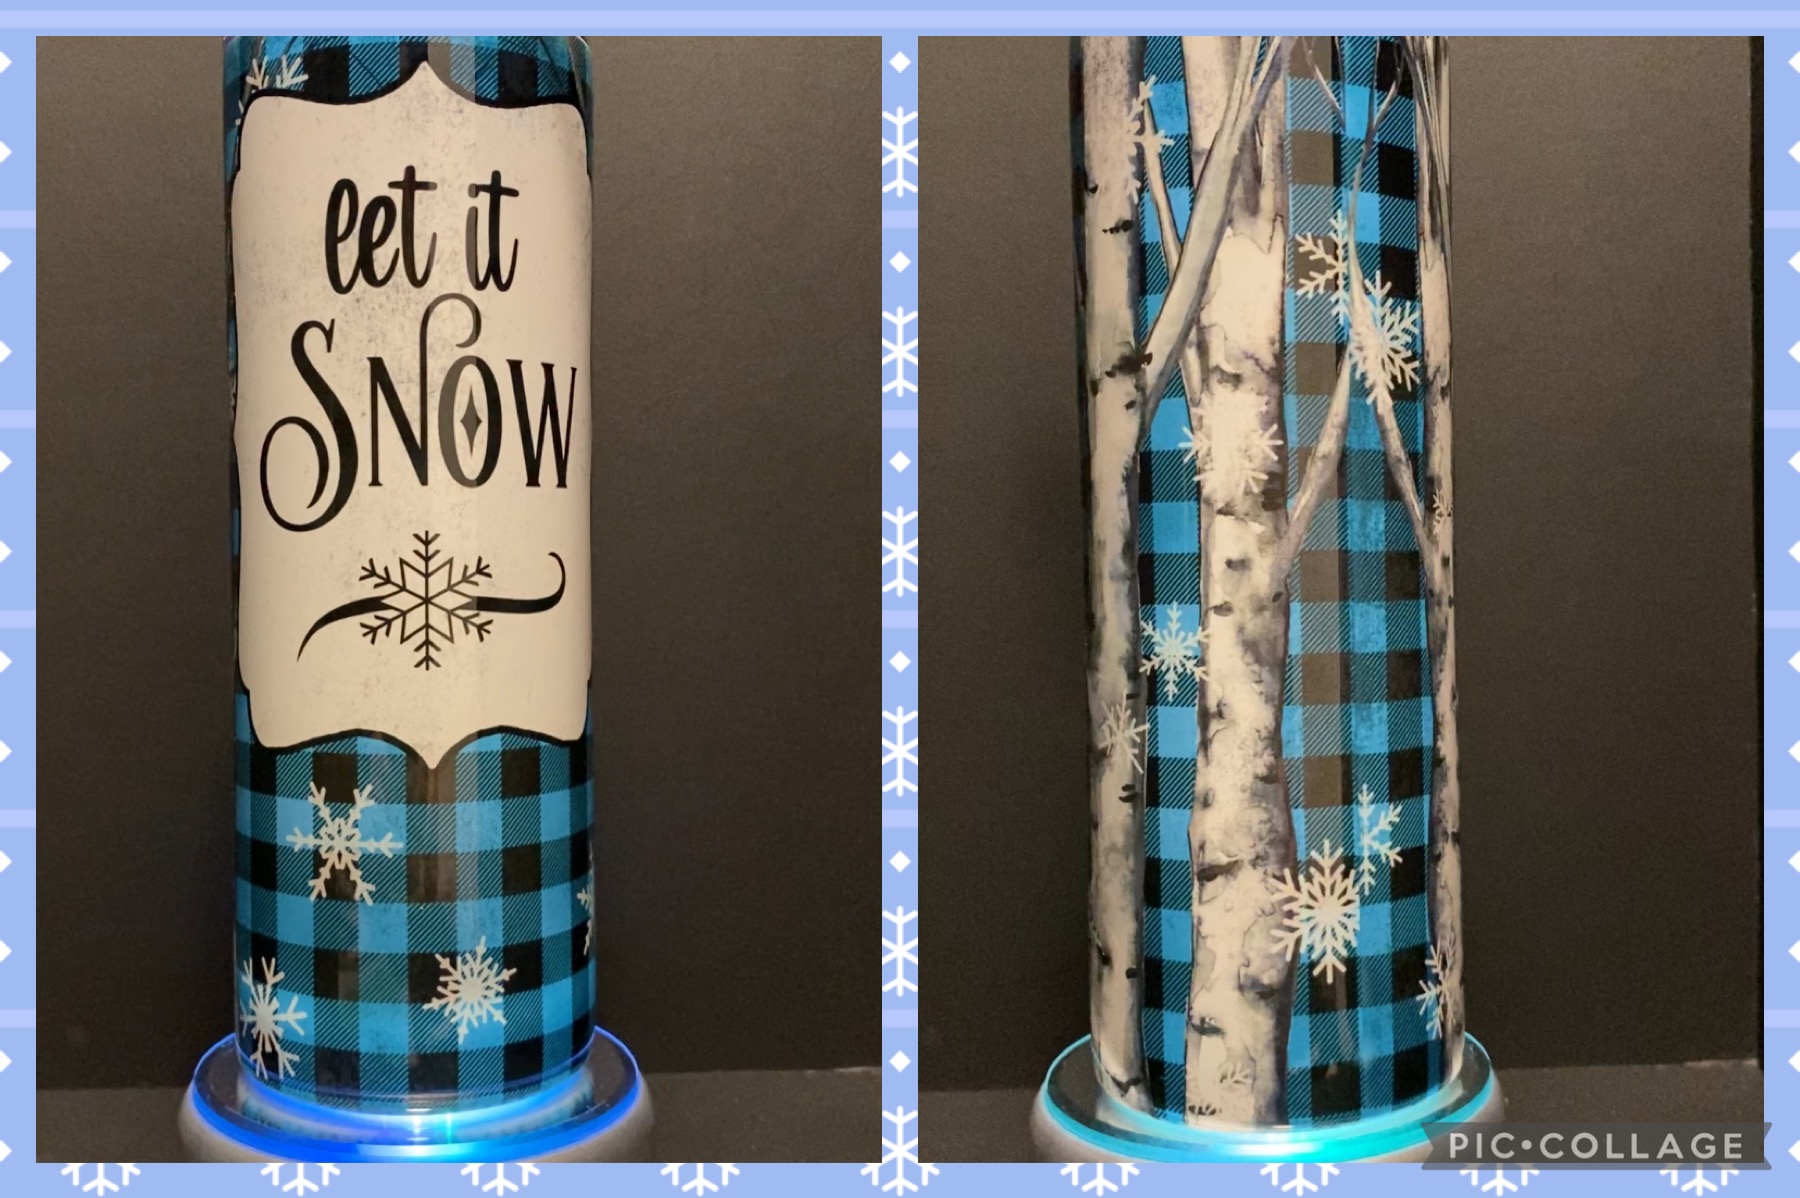 Let It Snow made with sublimation printing